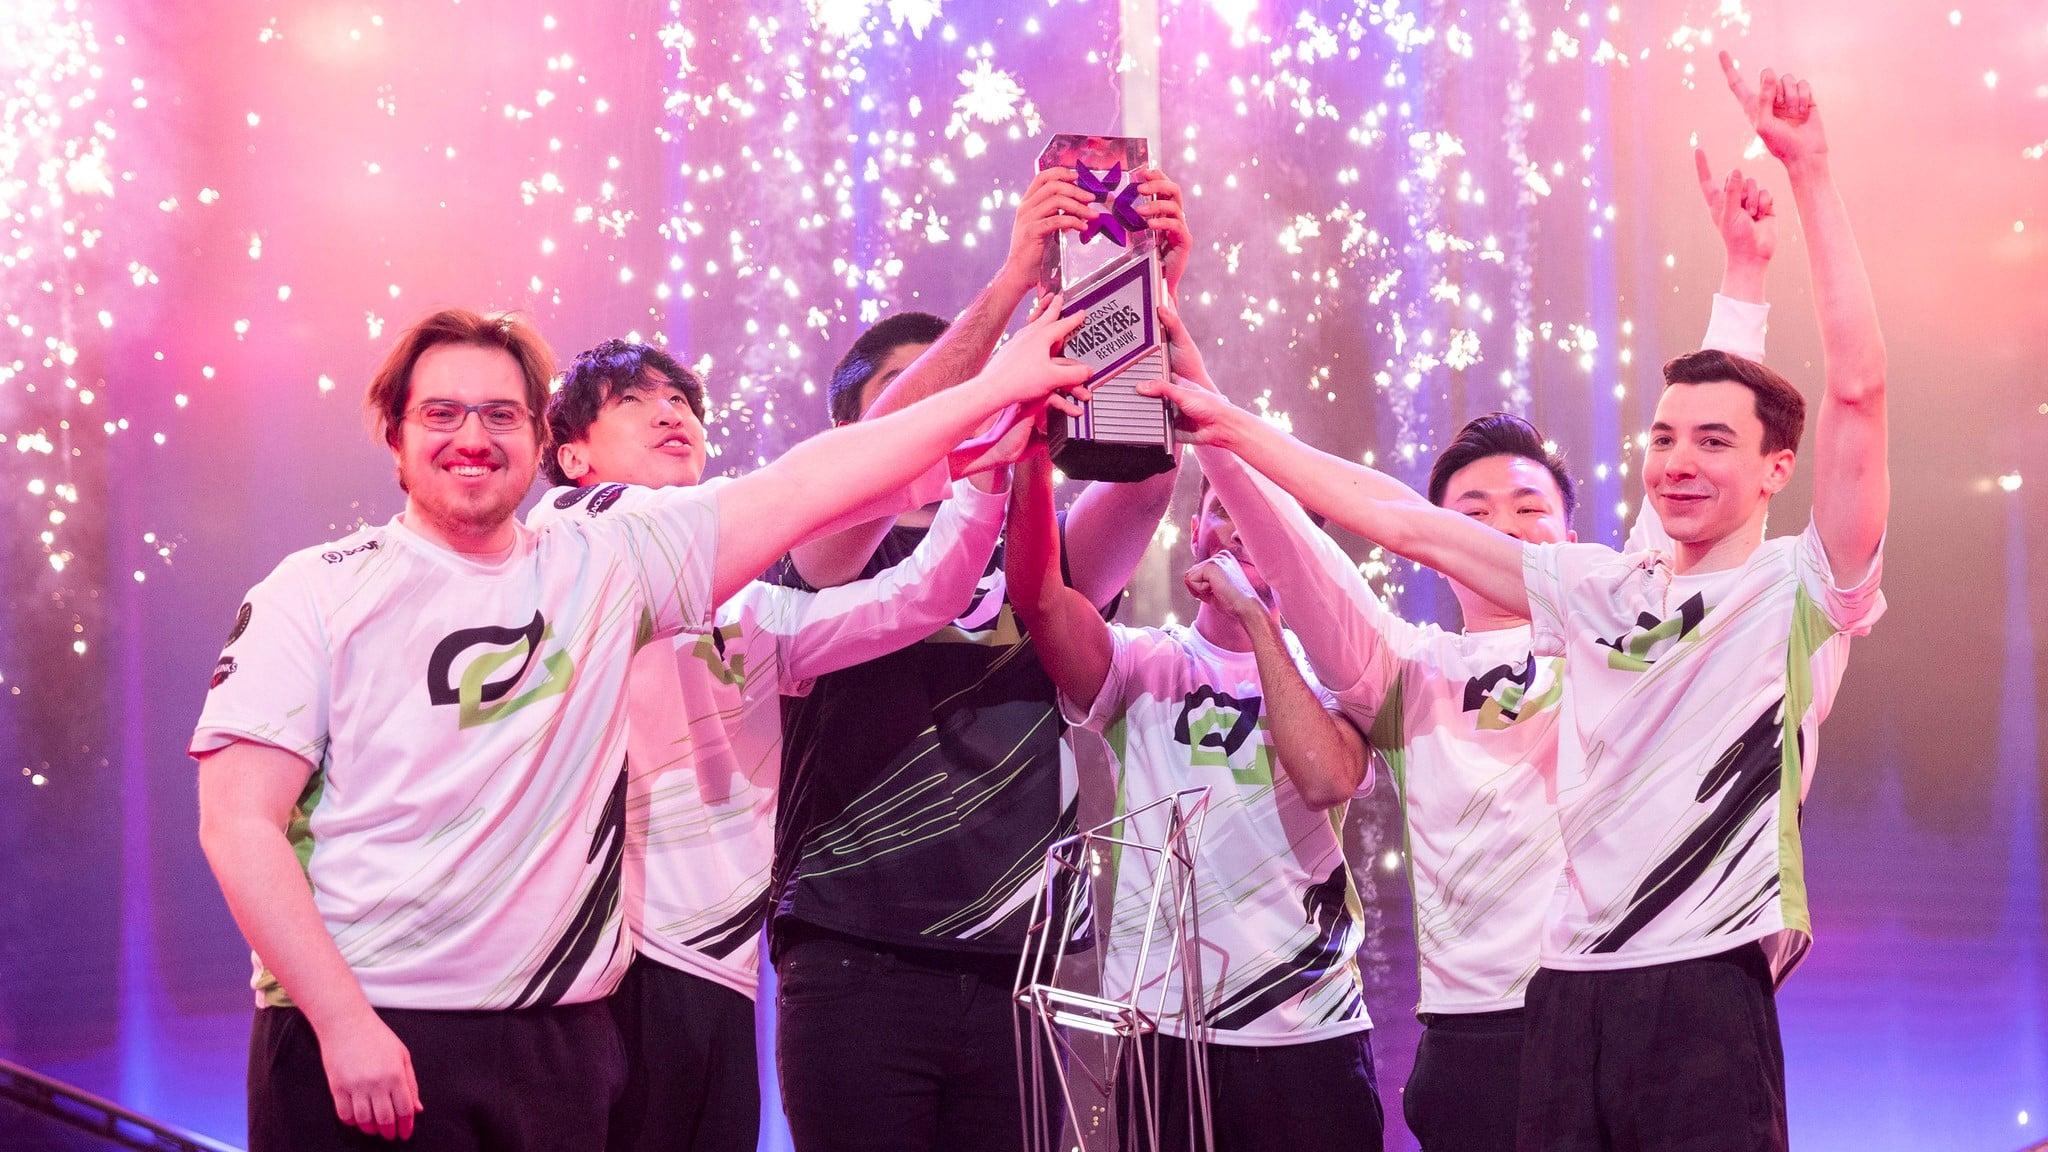 OpTic hold up the 2022 Masters Iceland trophy as a team